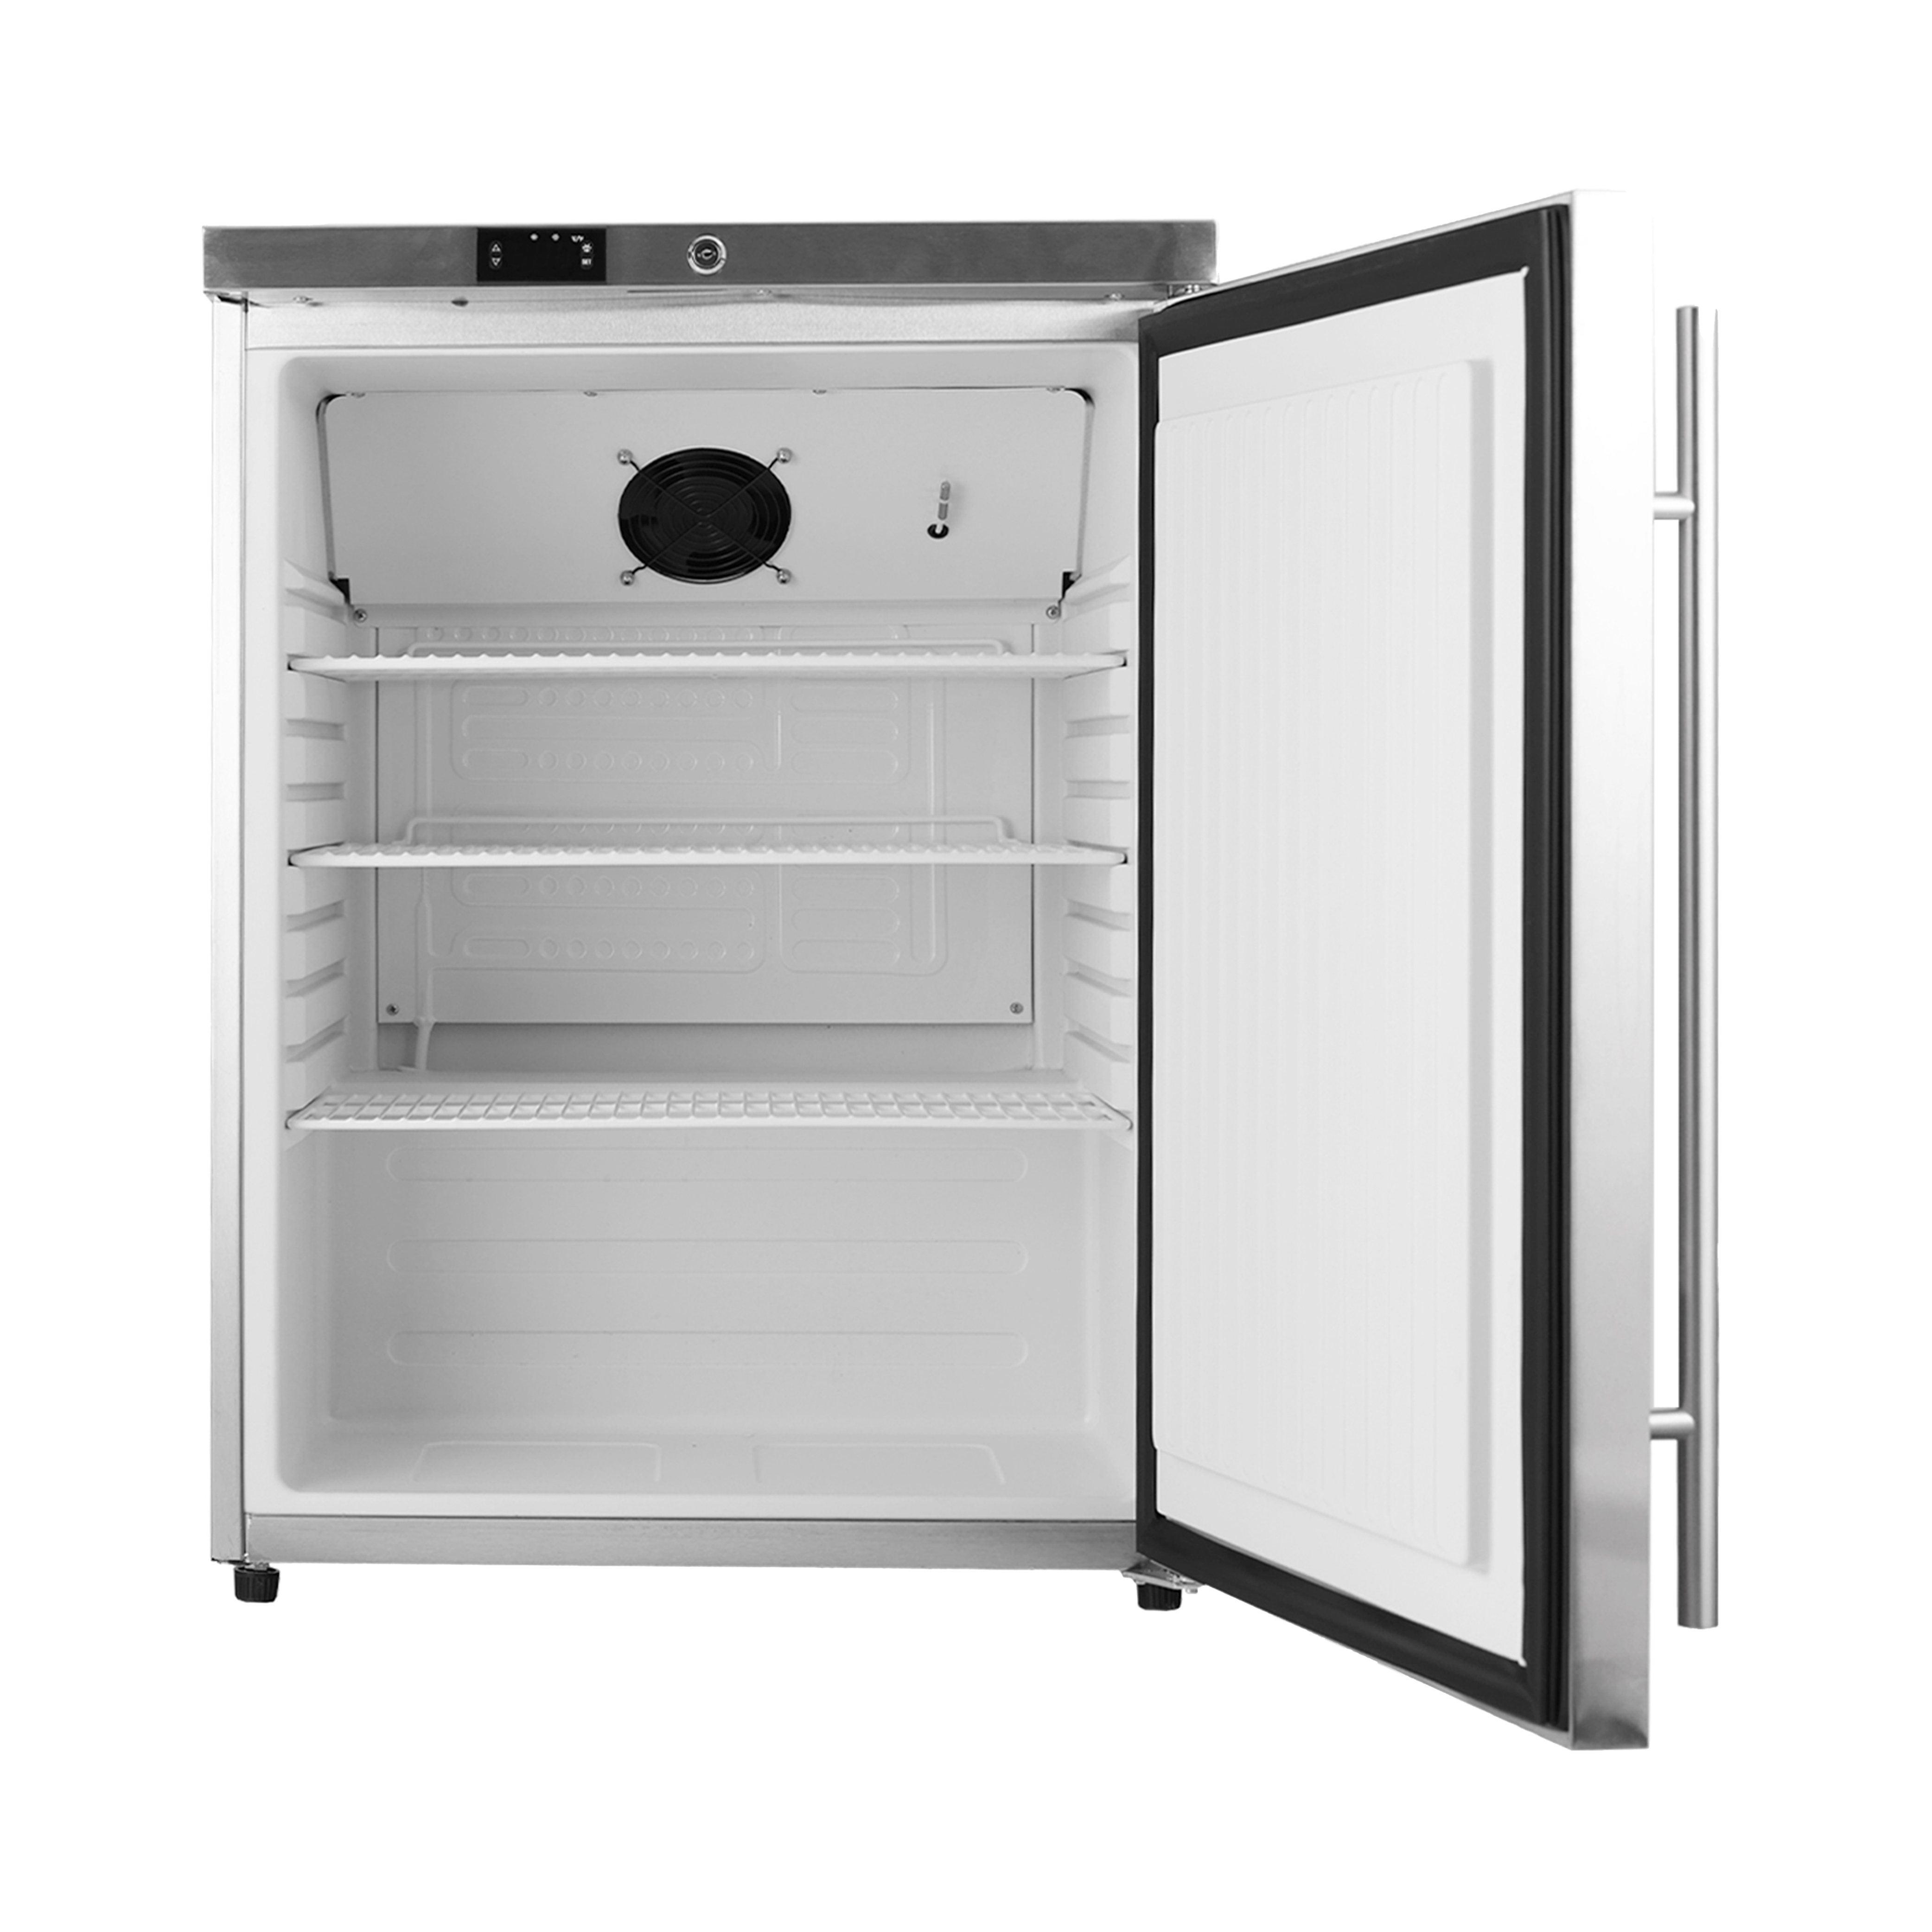 Front view of a 5.4 Cu Ft Stainless Steel Undercounter Outdoor Refrigerator with the door open, showcasing the interior space with three shelves partially stocked with cans of beverage